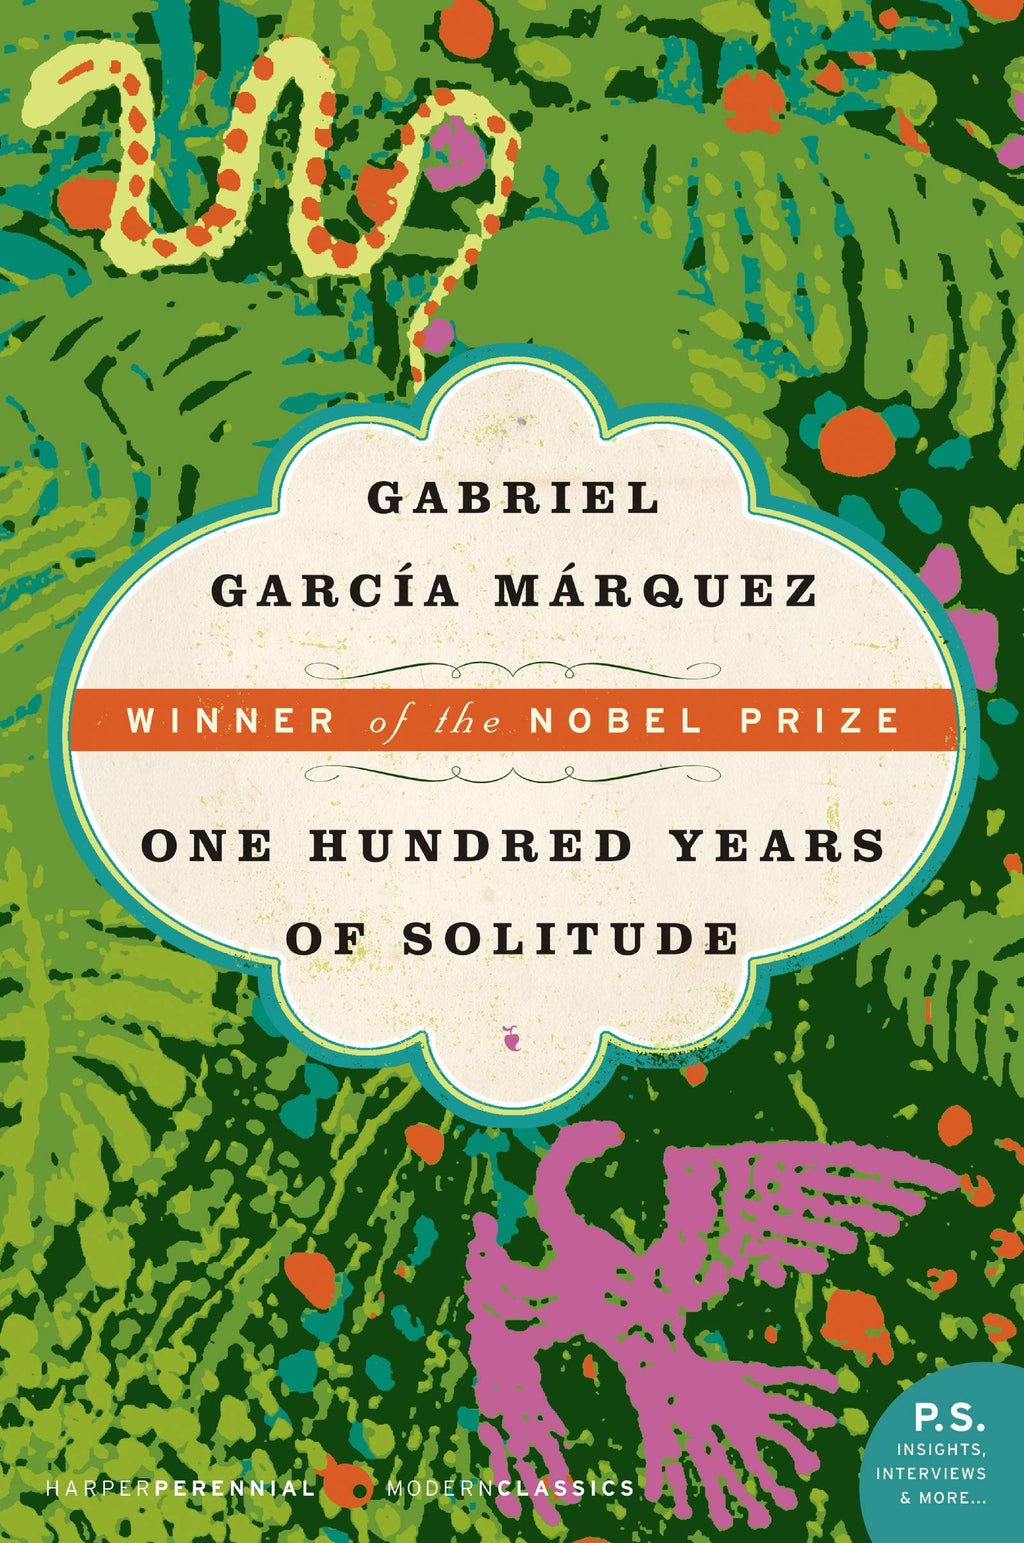 Cover of  “One hundred years of solitude”, by Gabriel García Márquez